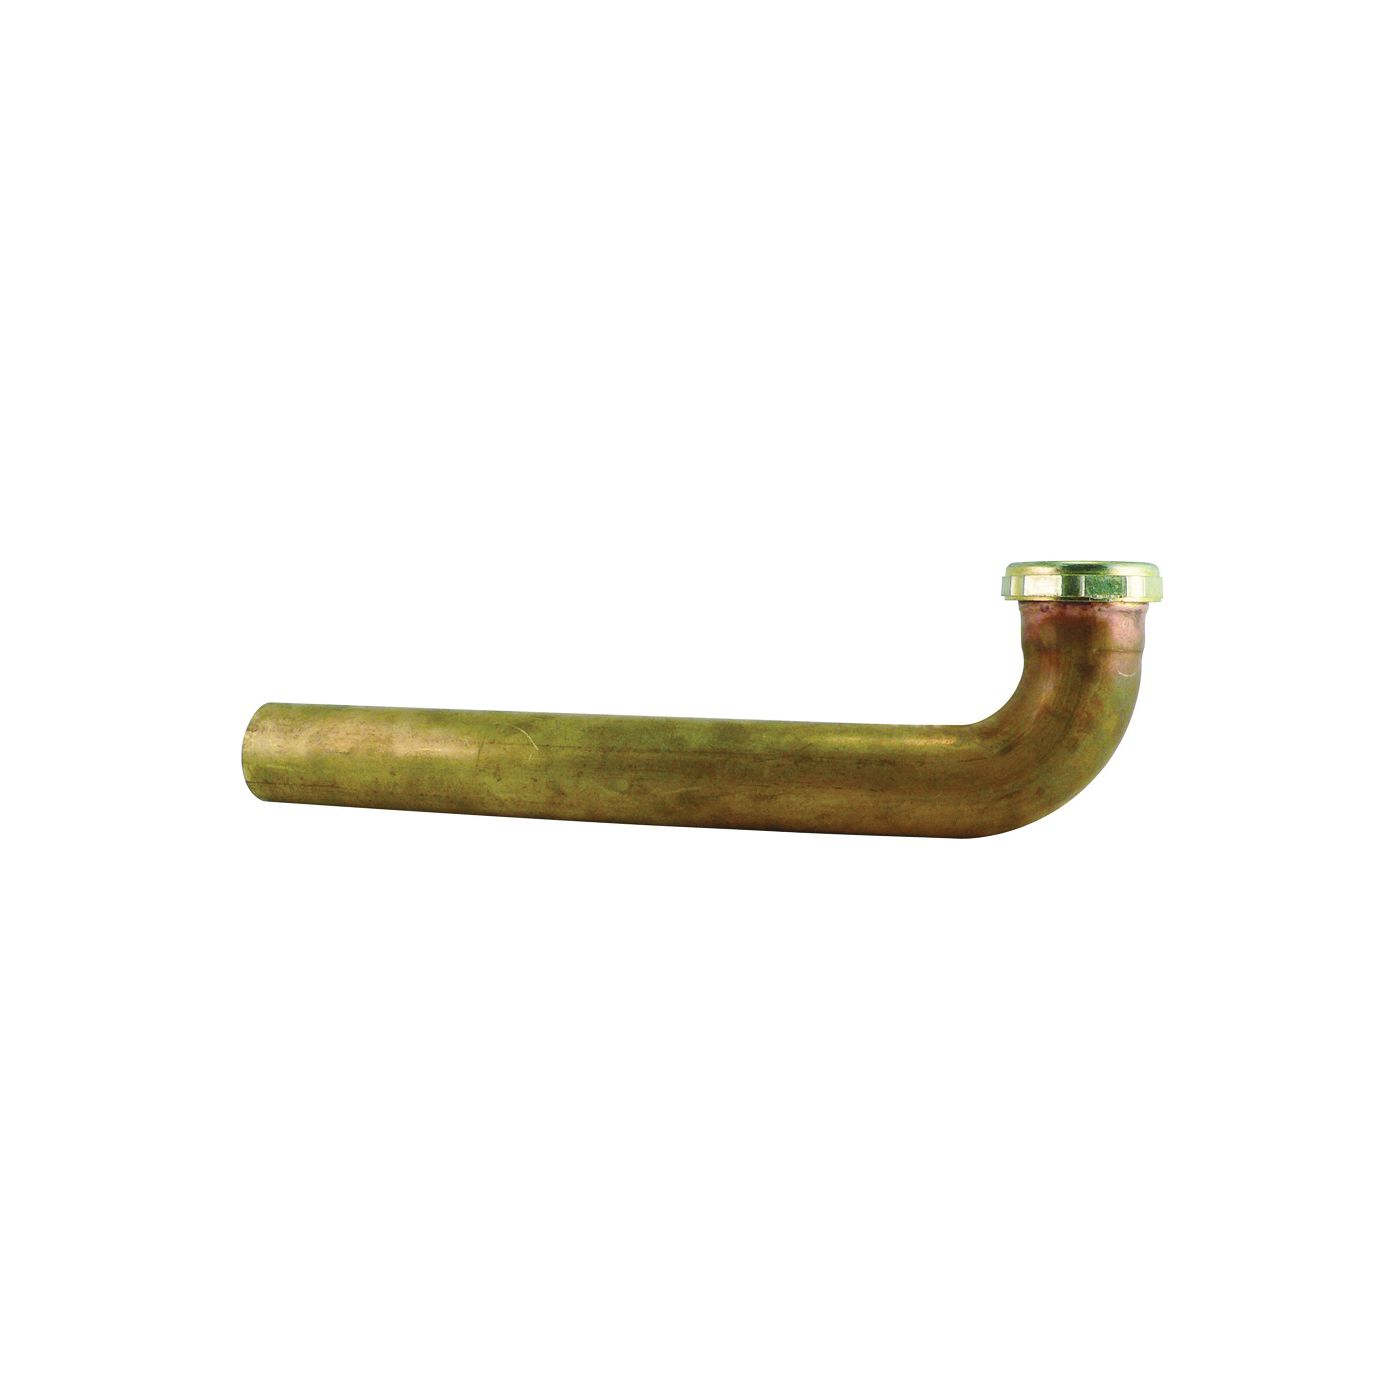 Keeney PP1625RB Waste Arm, 1-1/2 in, Slip Joint, Brass, Rough